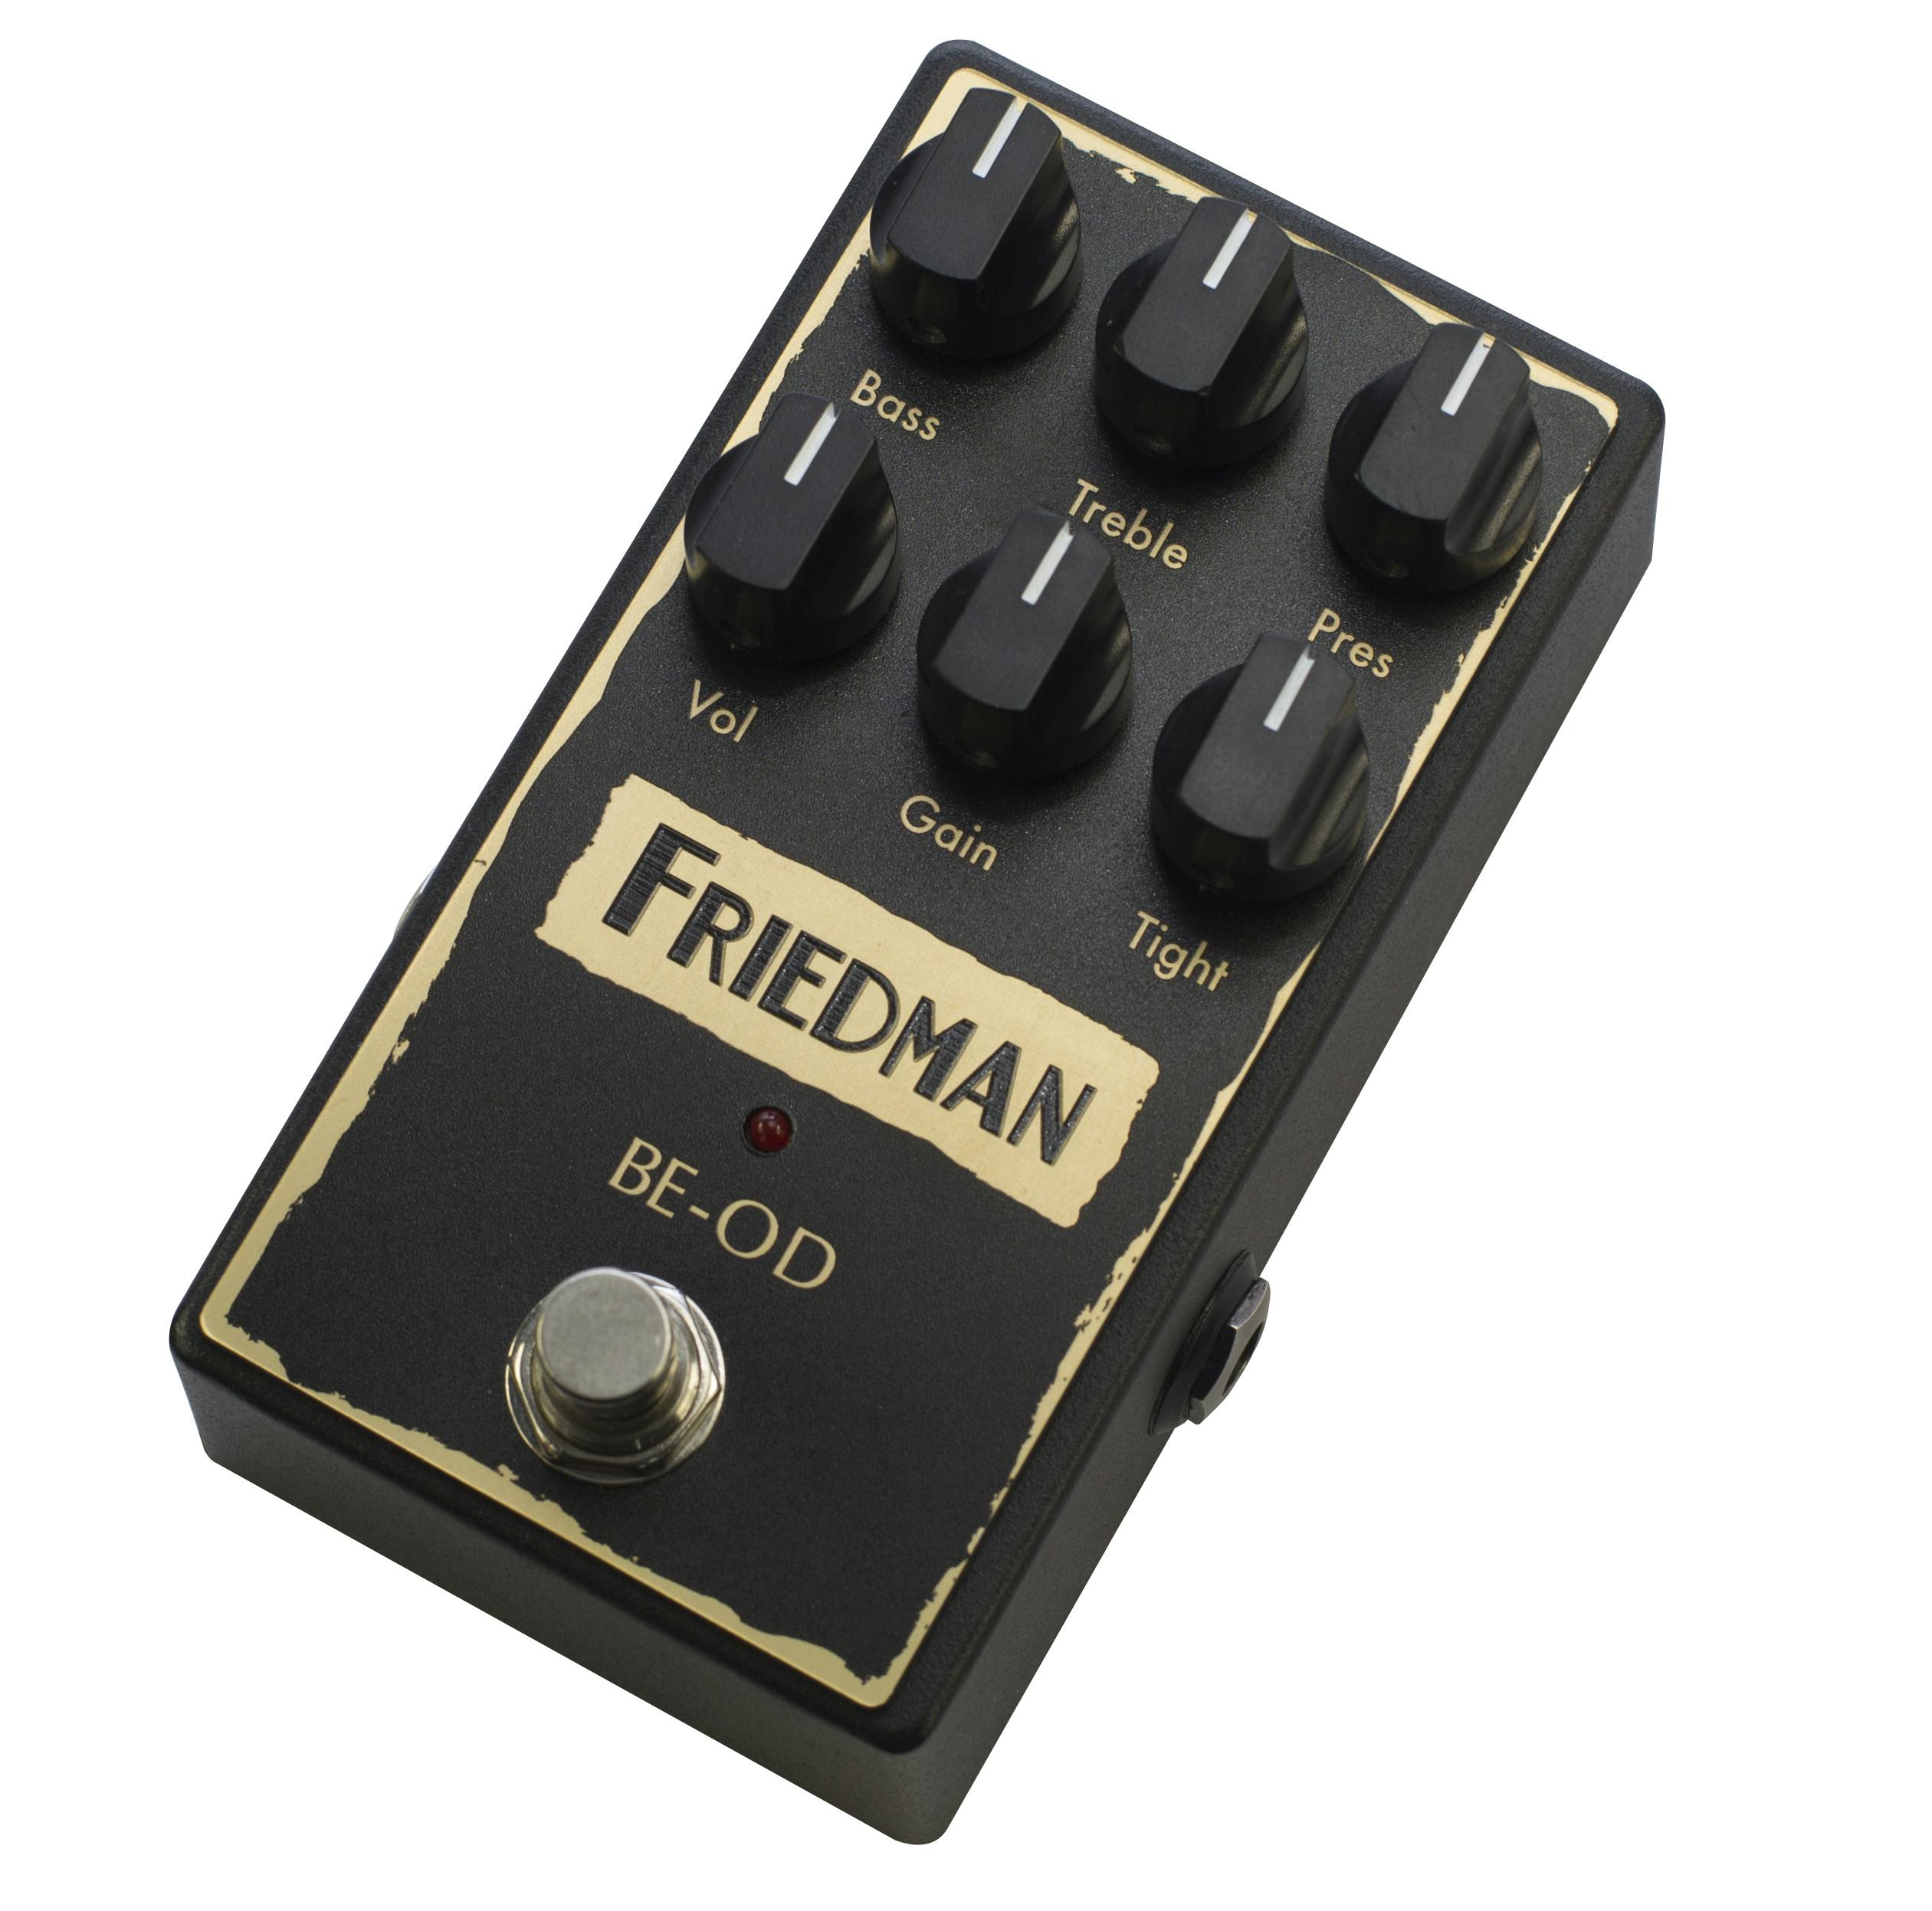 Andertons　Friedman　BE-OD　Music　Overdrive　Pedal　Co.